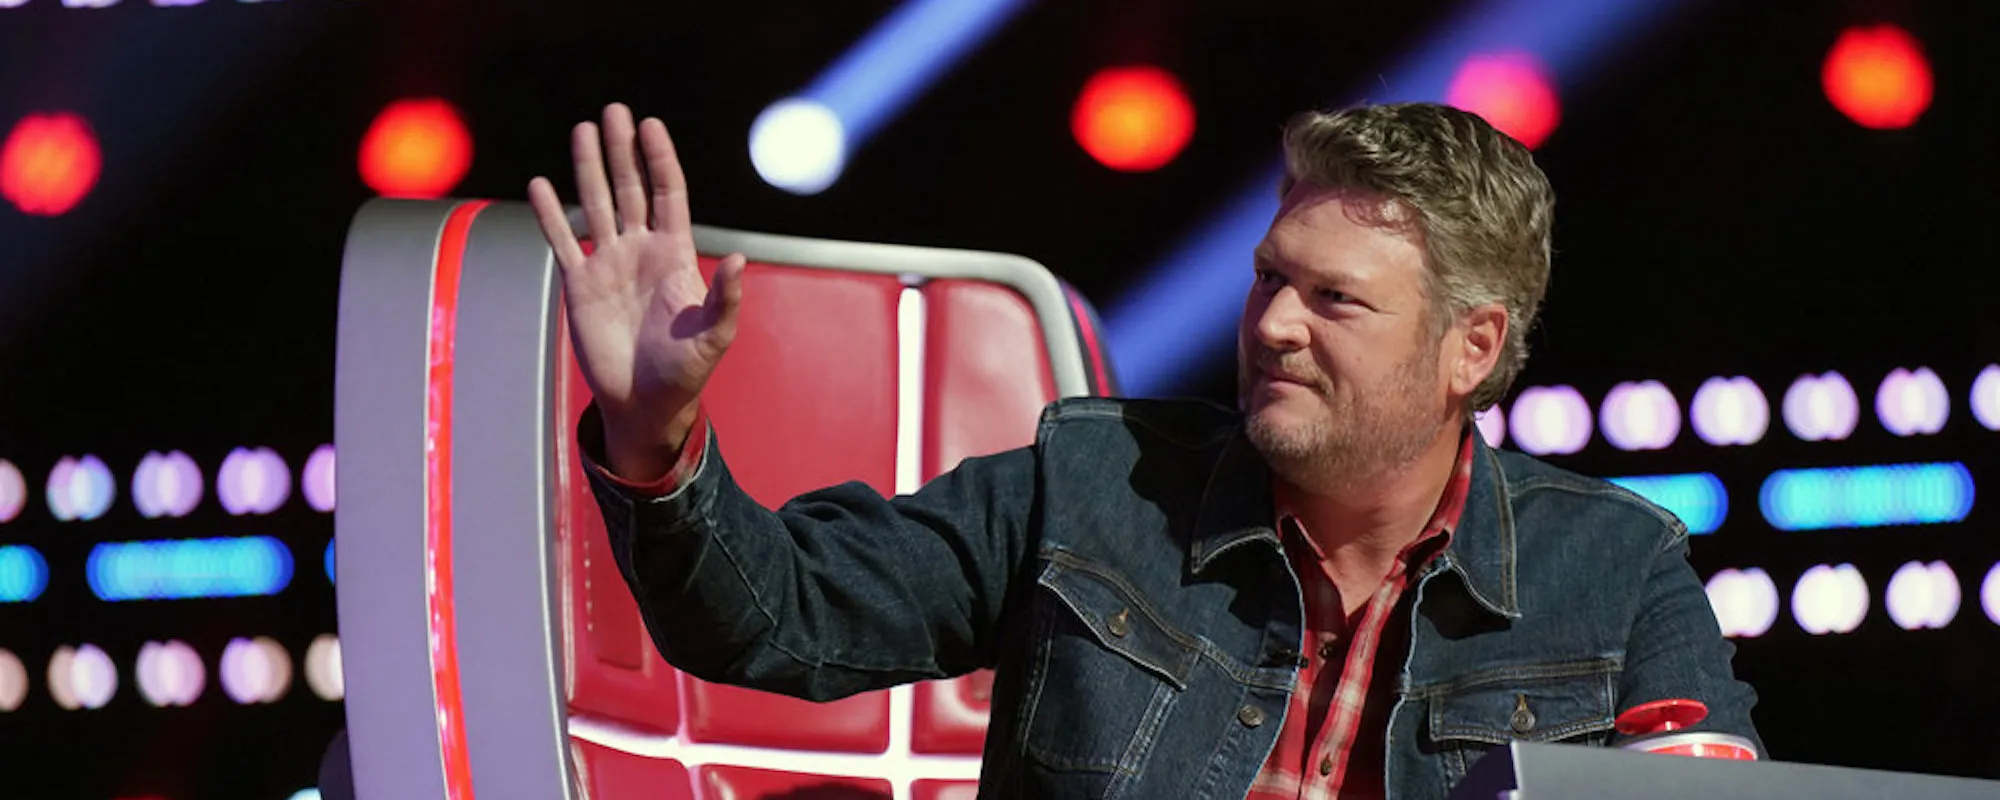 Blake Shelton, John Legend, Carly Pearce to Perform on ‘The Voice’ Semifinals